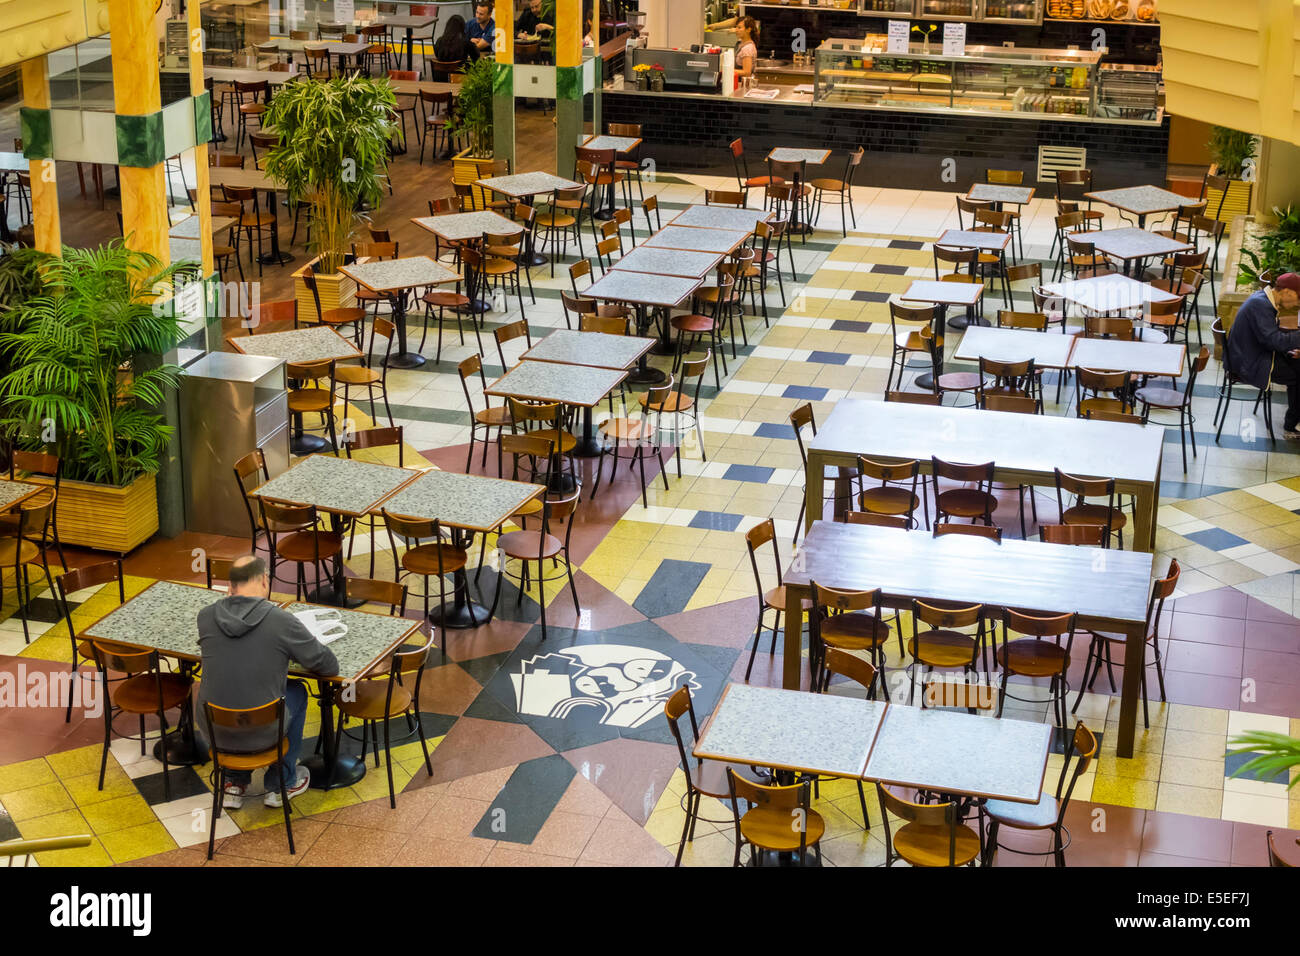 Melbourne Australia,Chinatown,Paramount Centre,food court plaza,nearly empty,tables,chairs,one,man men male,AU140321032 Stock Photo